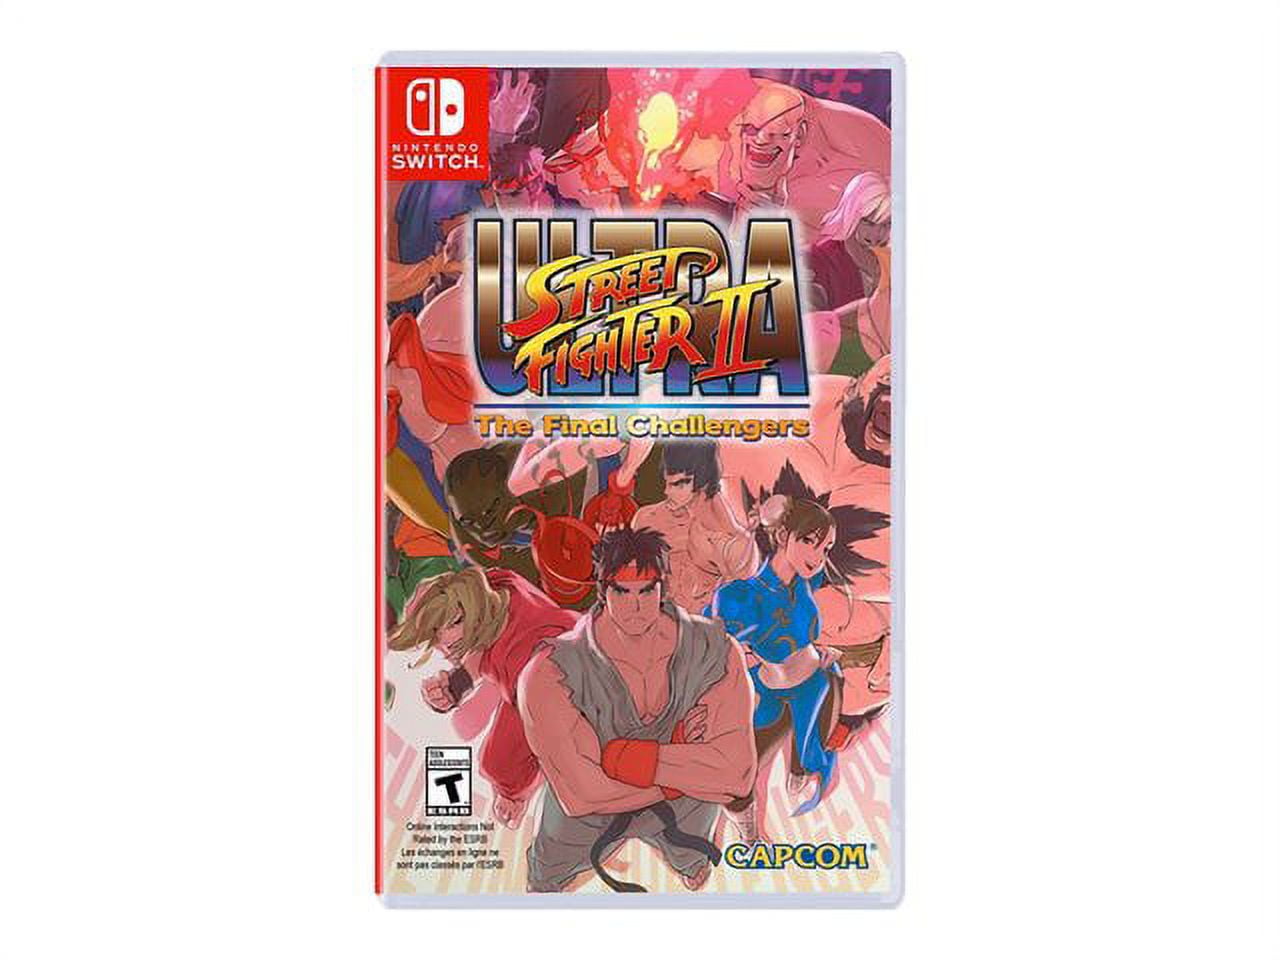 Ultra Street Fighter II: The Final Challengers - Nintendo Switch [Capcom]  NEW